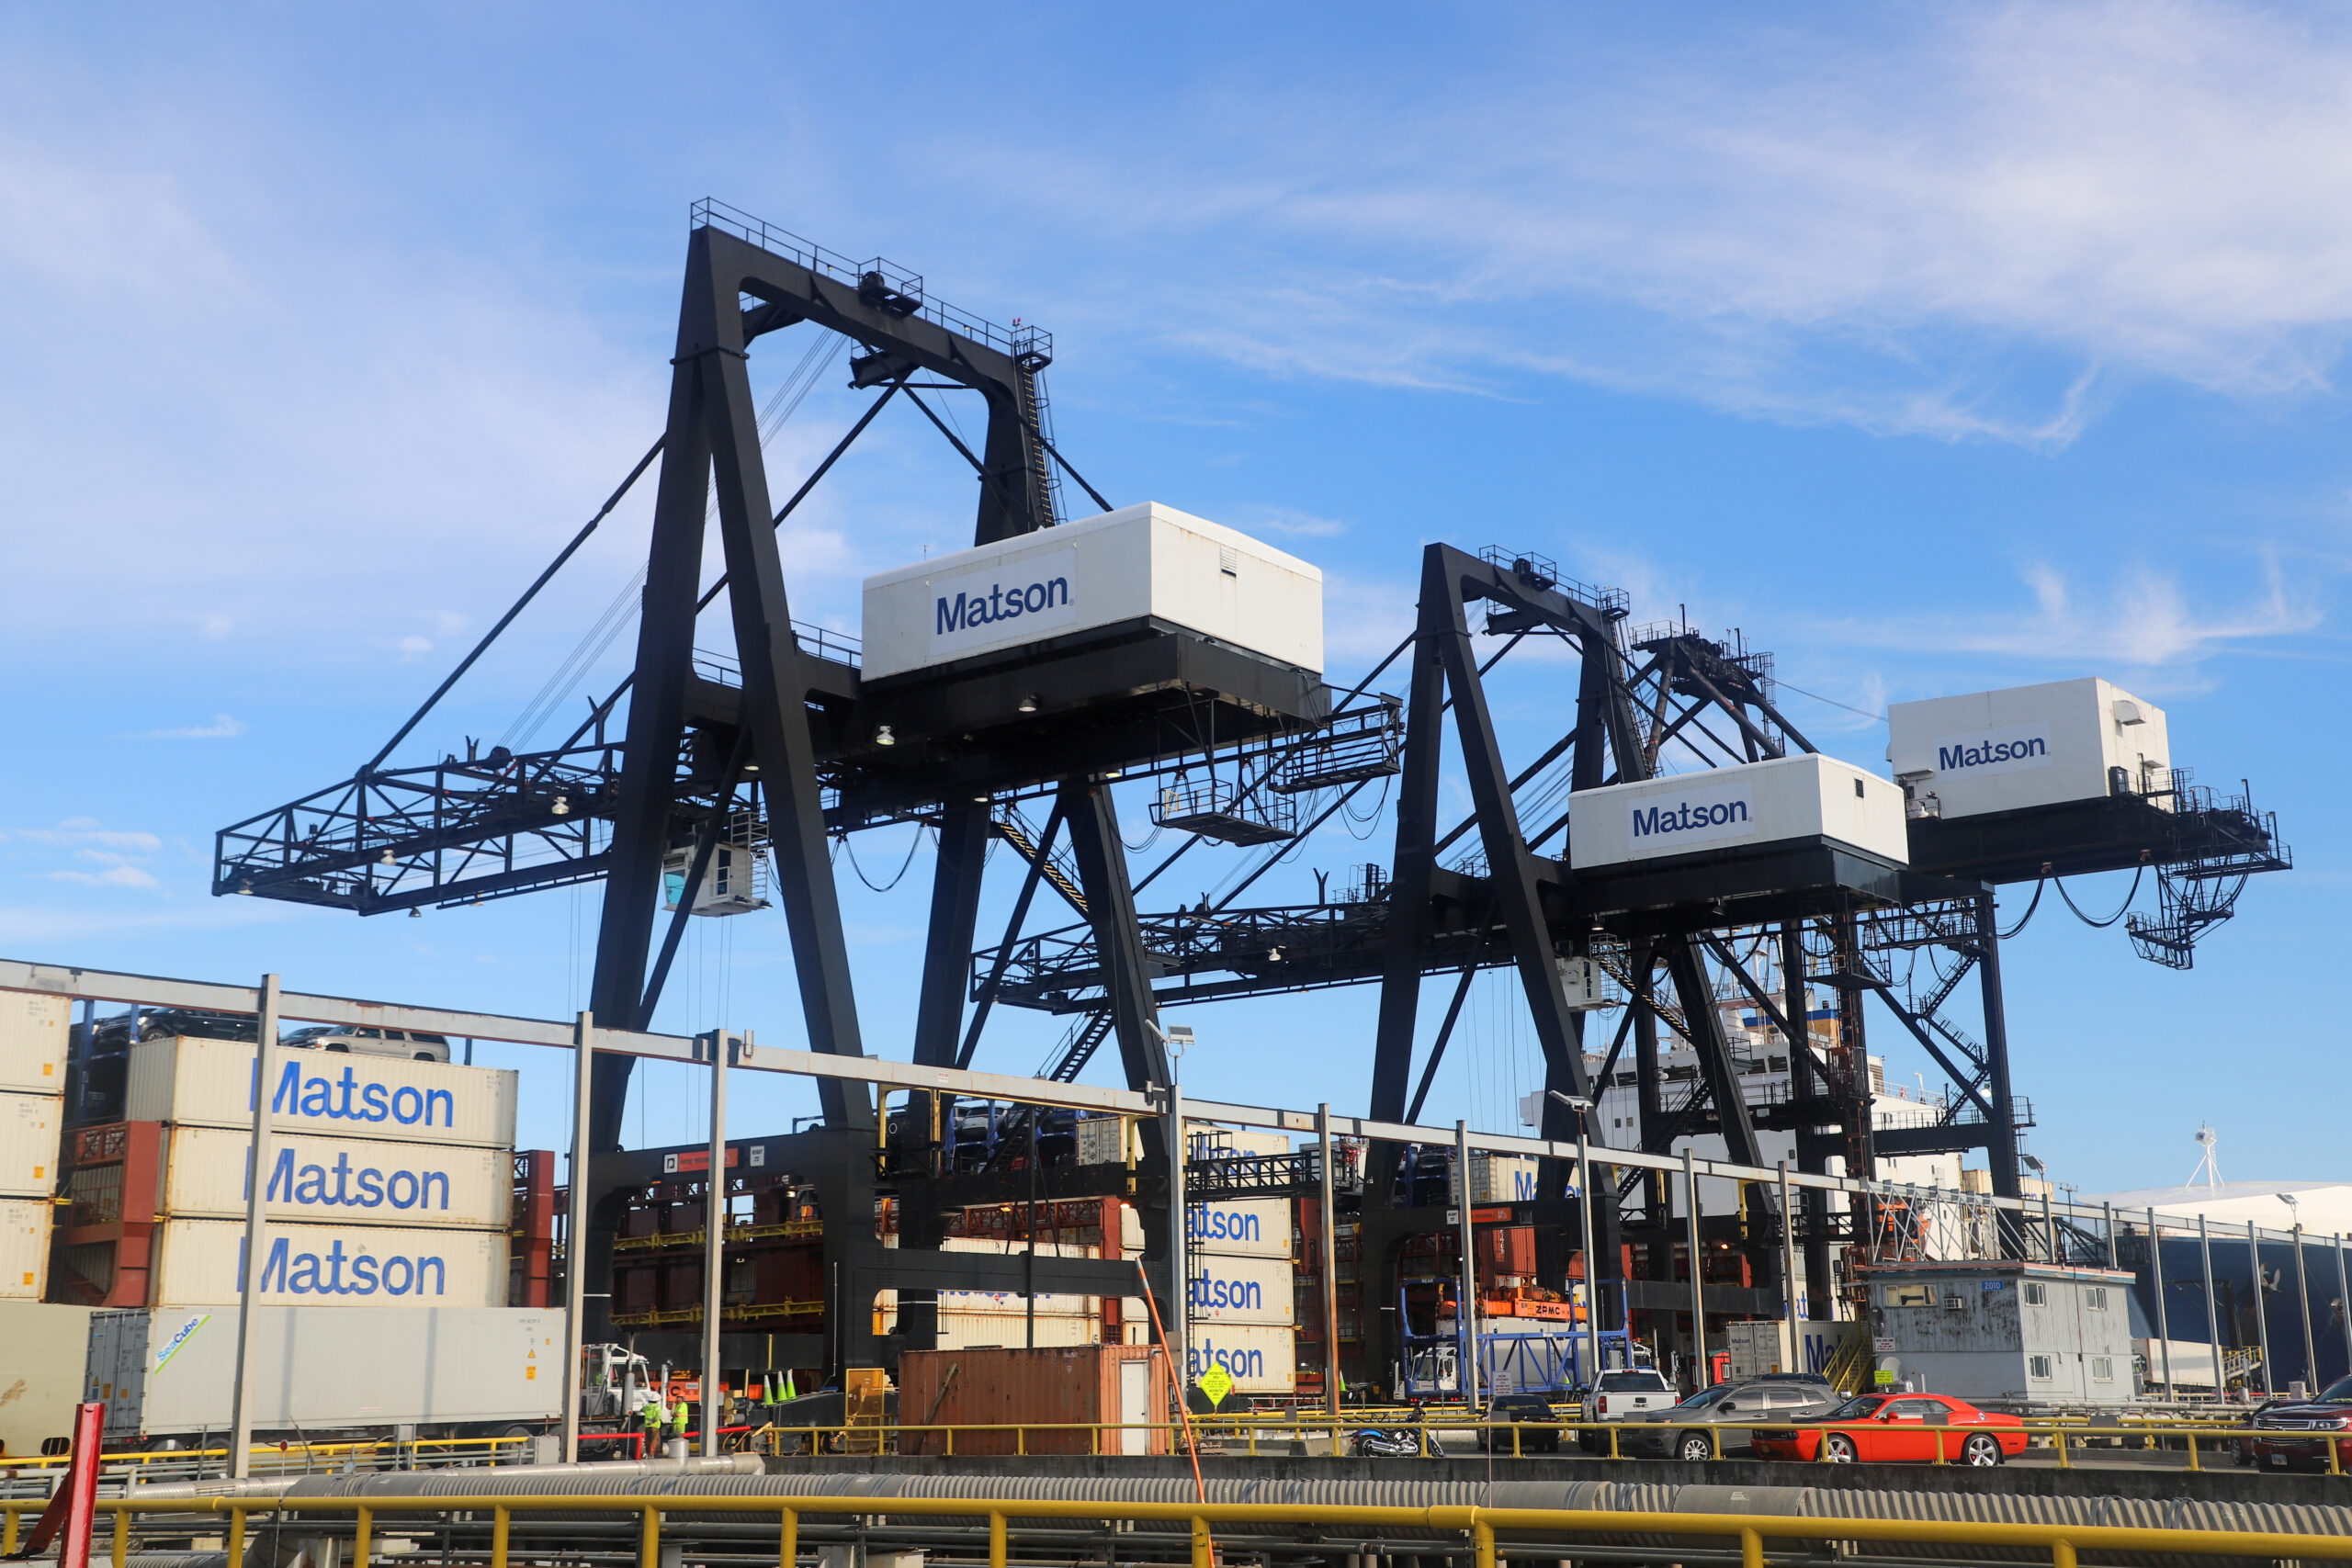 Large cranes and stacks of shipping containers